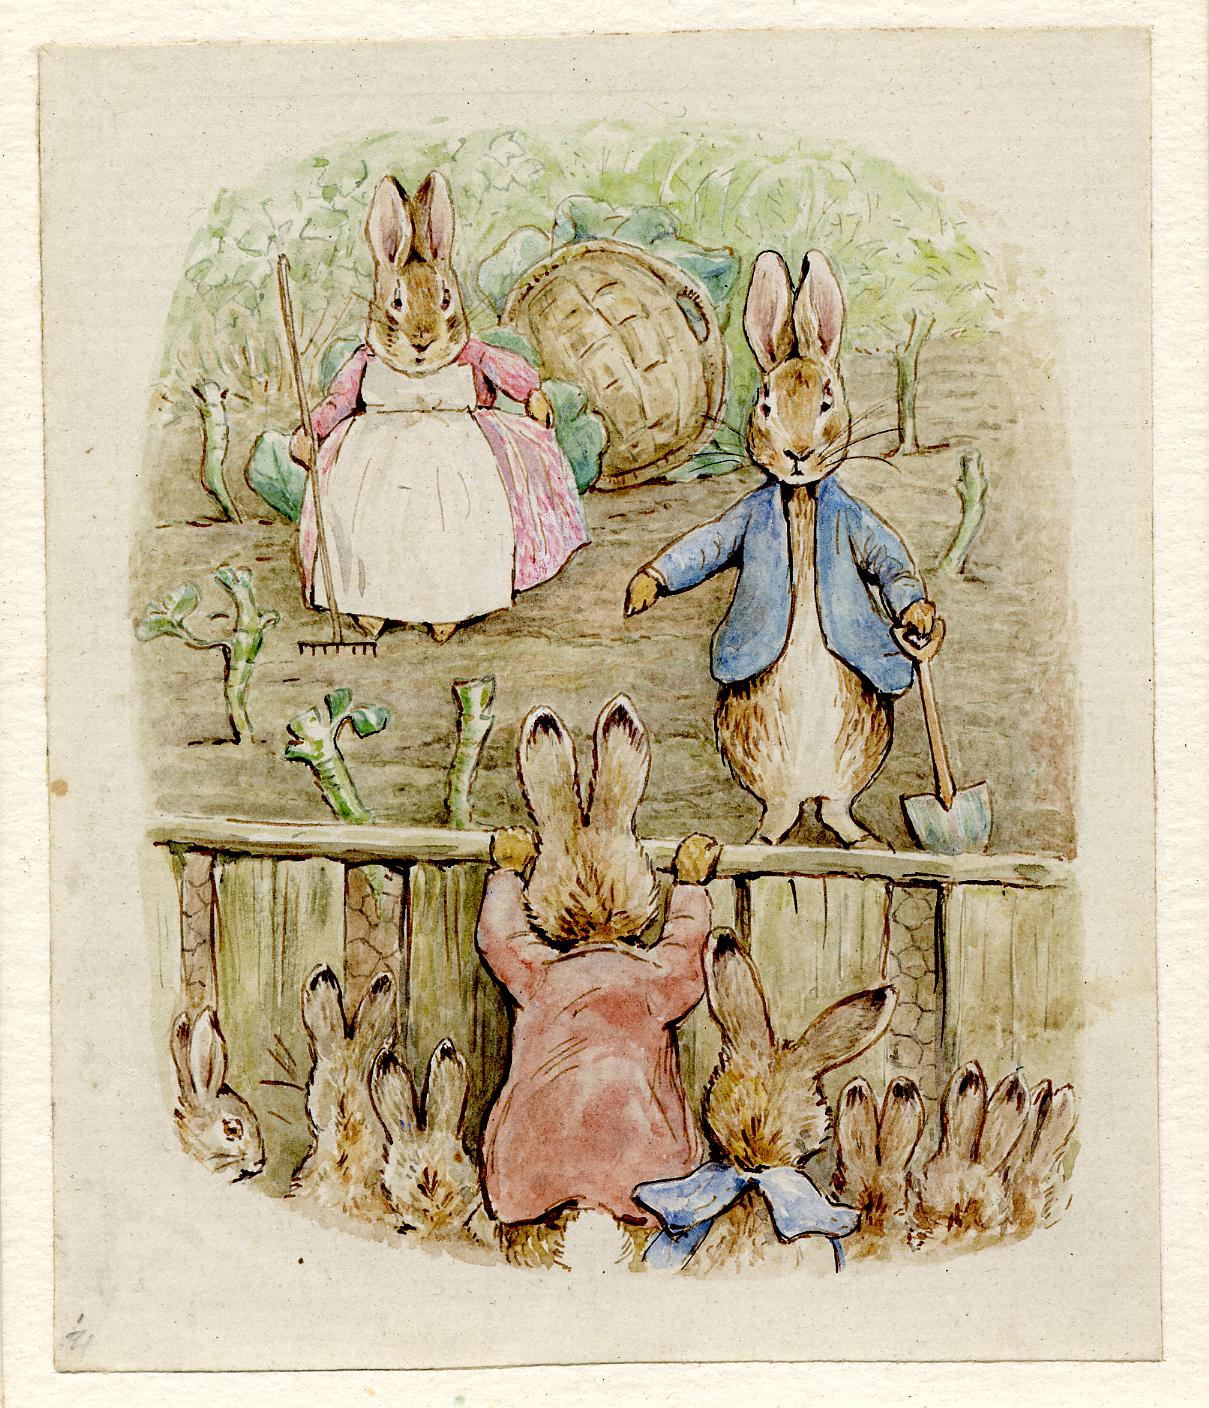 An illustration by Beatrix Potter from 'The Tale of the Flopsy Bunnies'. Image: The Trustees of the British Museum